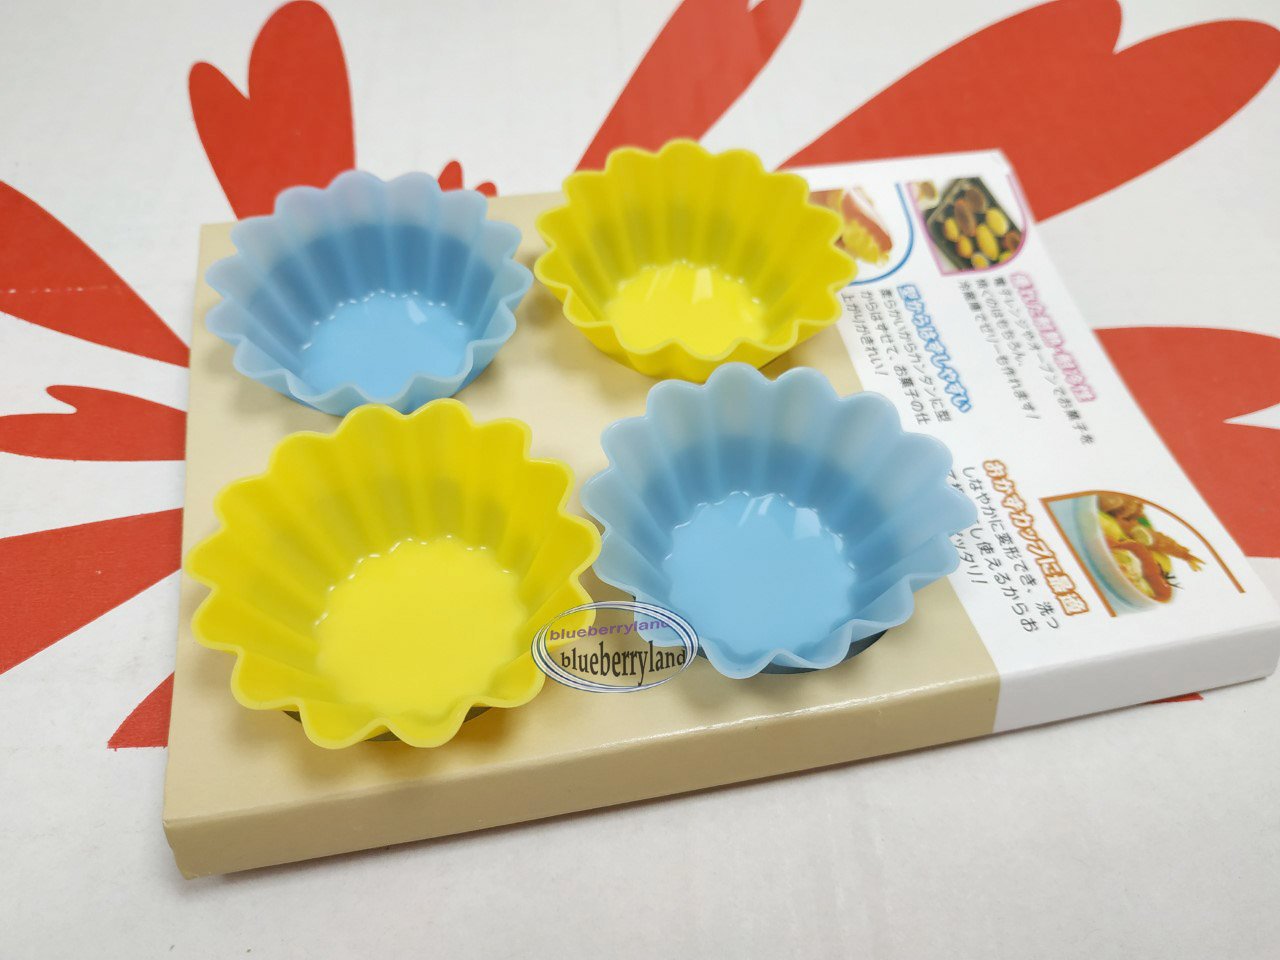 4 Silicone Cup flower shape Baking Cake tarts mould Side Dish Food container kitchen